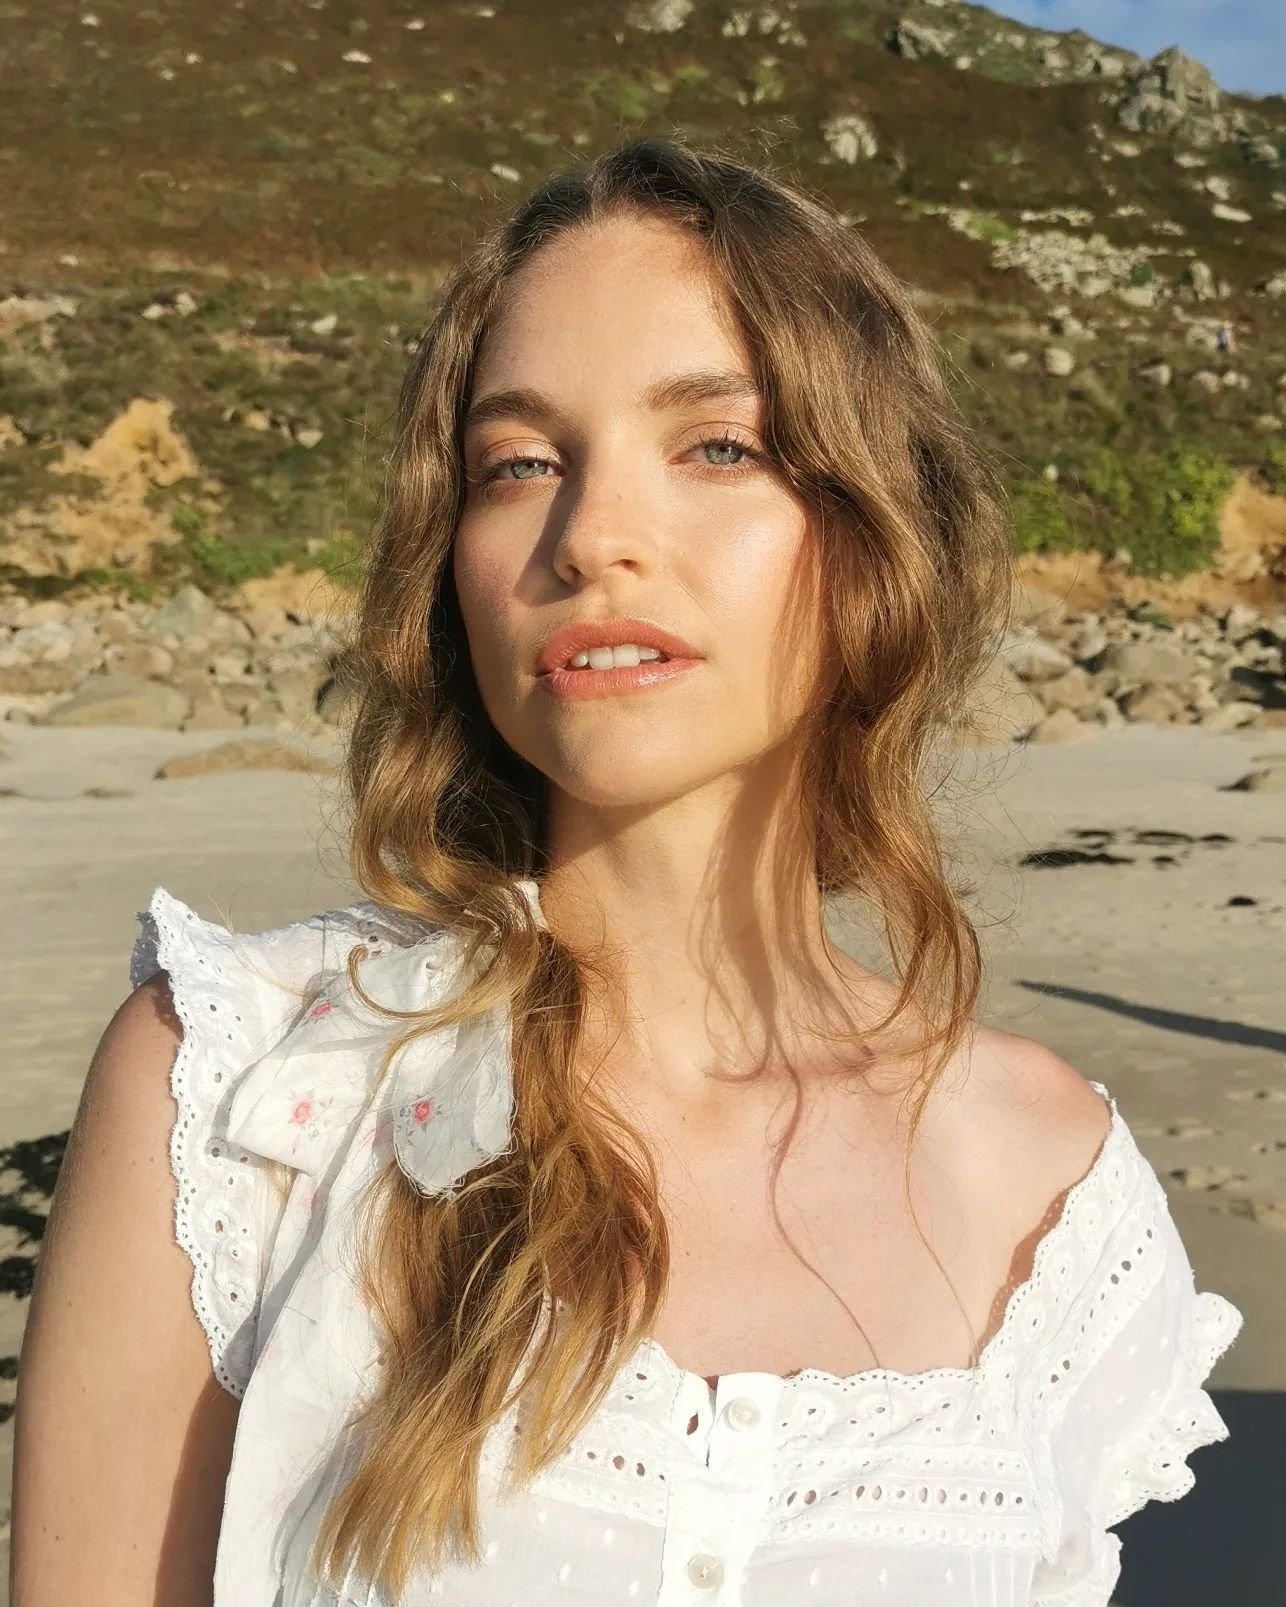 One of my favourite hair/makeups on the beautiful @isabellalilley for @lalikids 🌸
Shoot photographer @katylawrencefilm
We lucked out with the light and we shot during one of the most glorious golden sunsets of the year 🌅
.
#makeupartist #cornwallmu